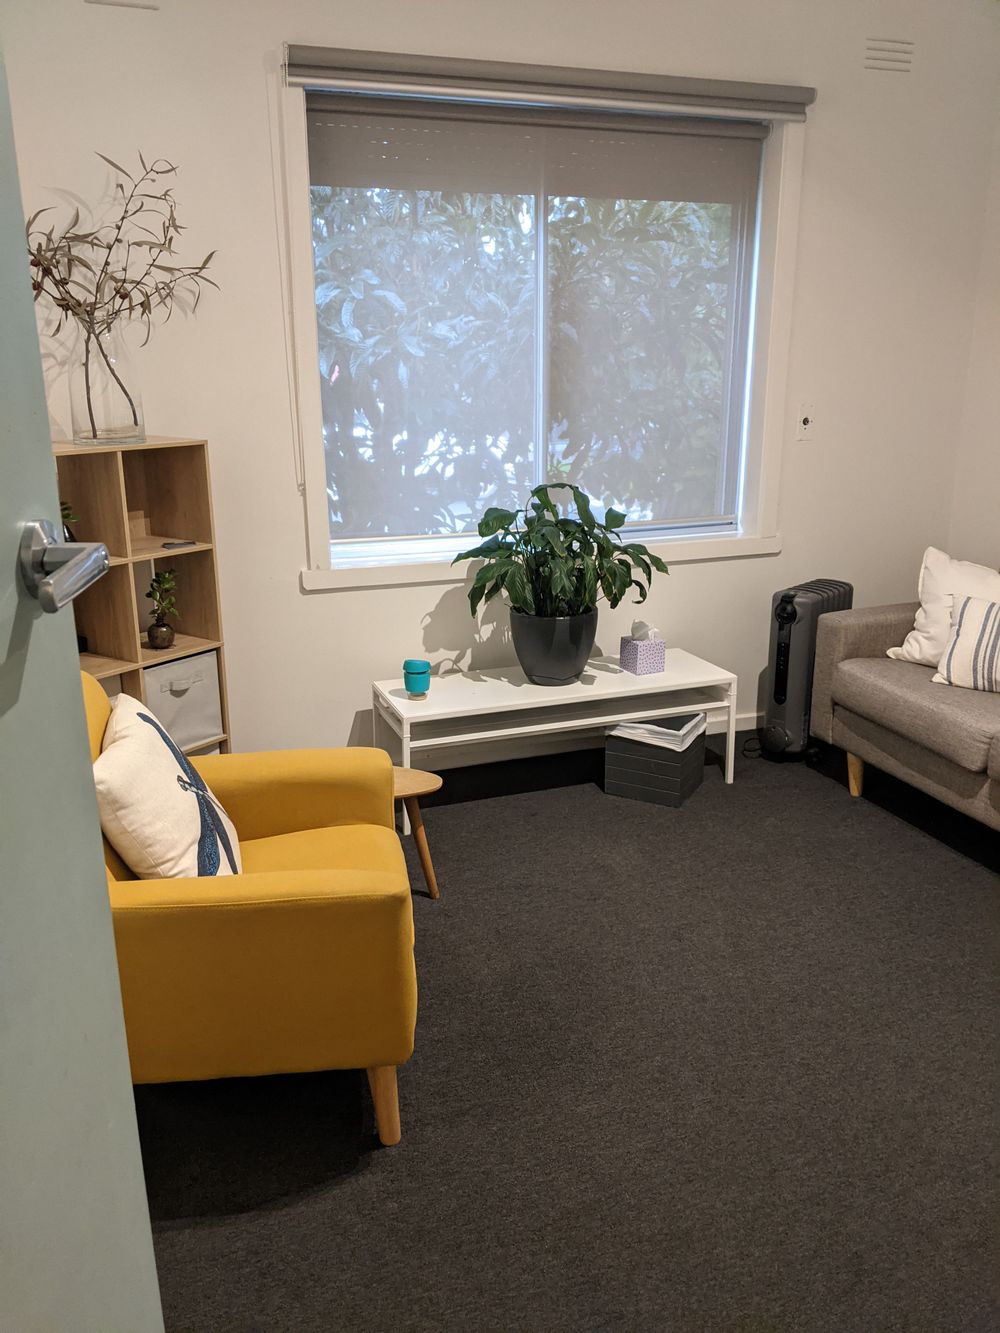 Our consulting room in West Footscray!